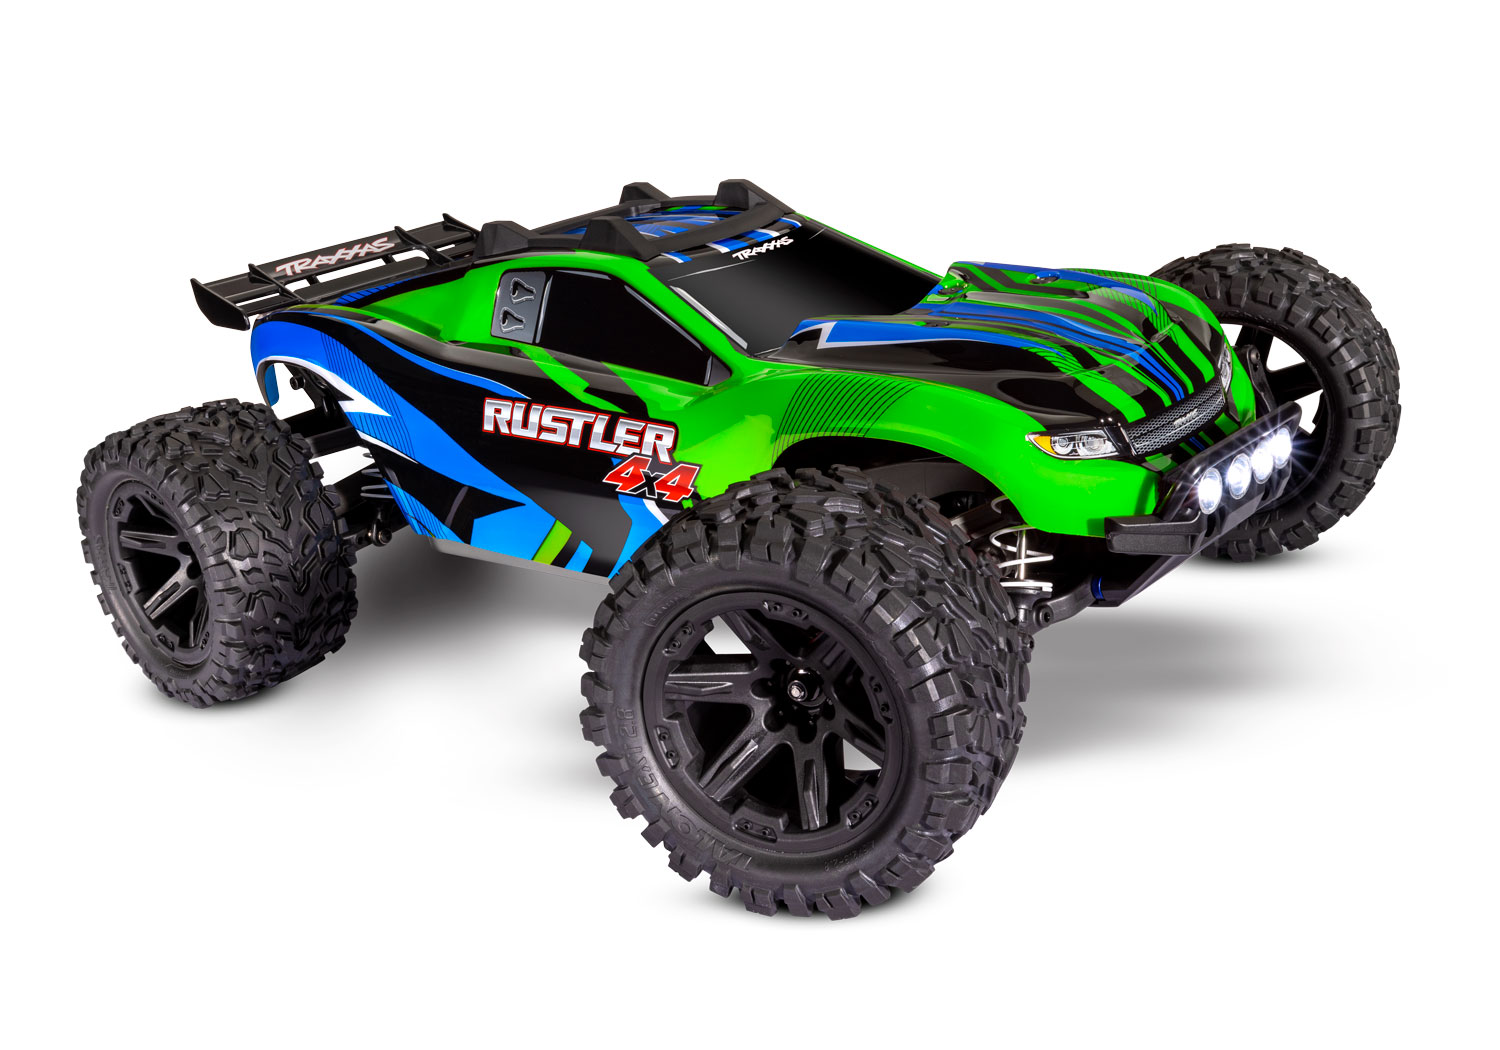 Traxxas Rustler 4x4 XL5 4WD electro truggy RTR 2.4Ghz met LED verlichting inclusief Power Pack - Groen